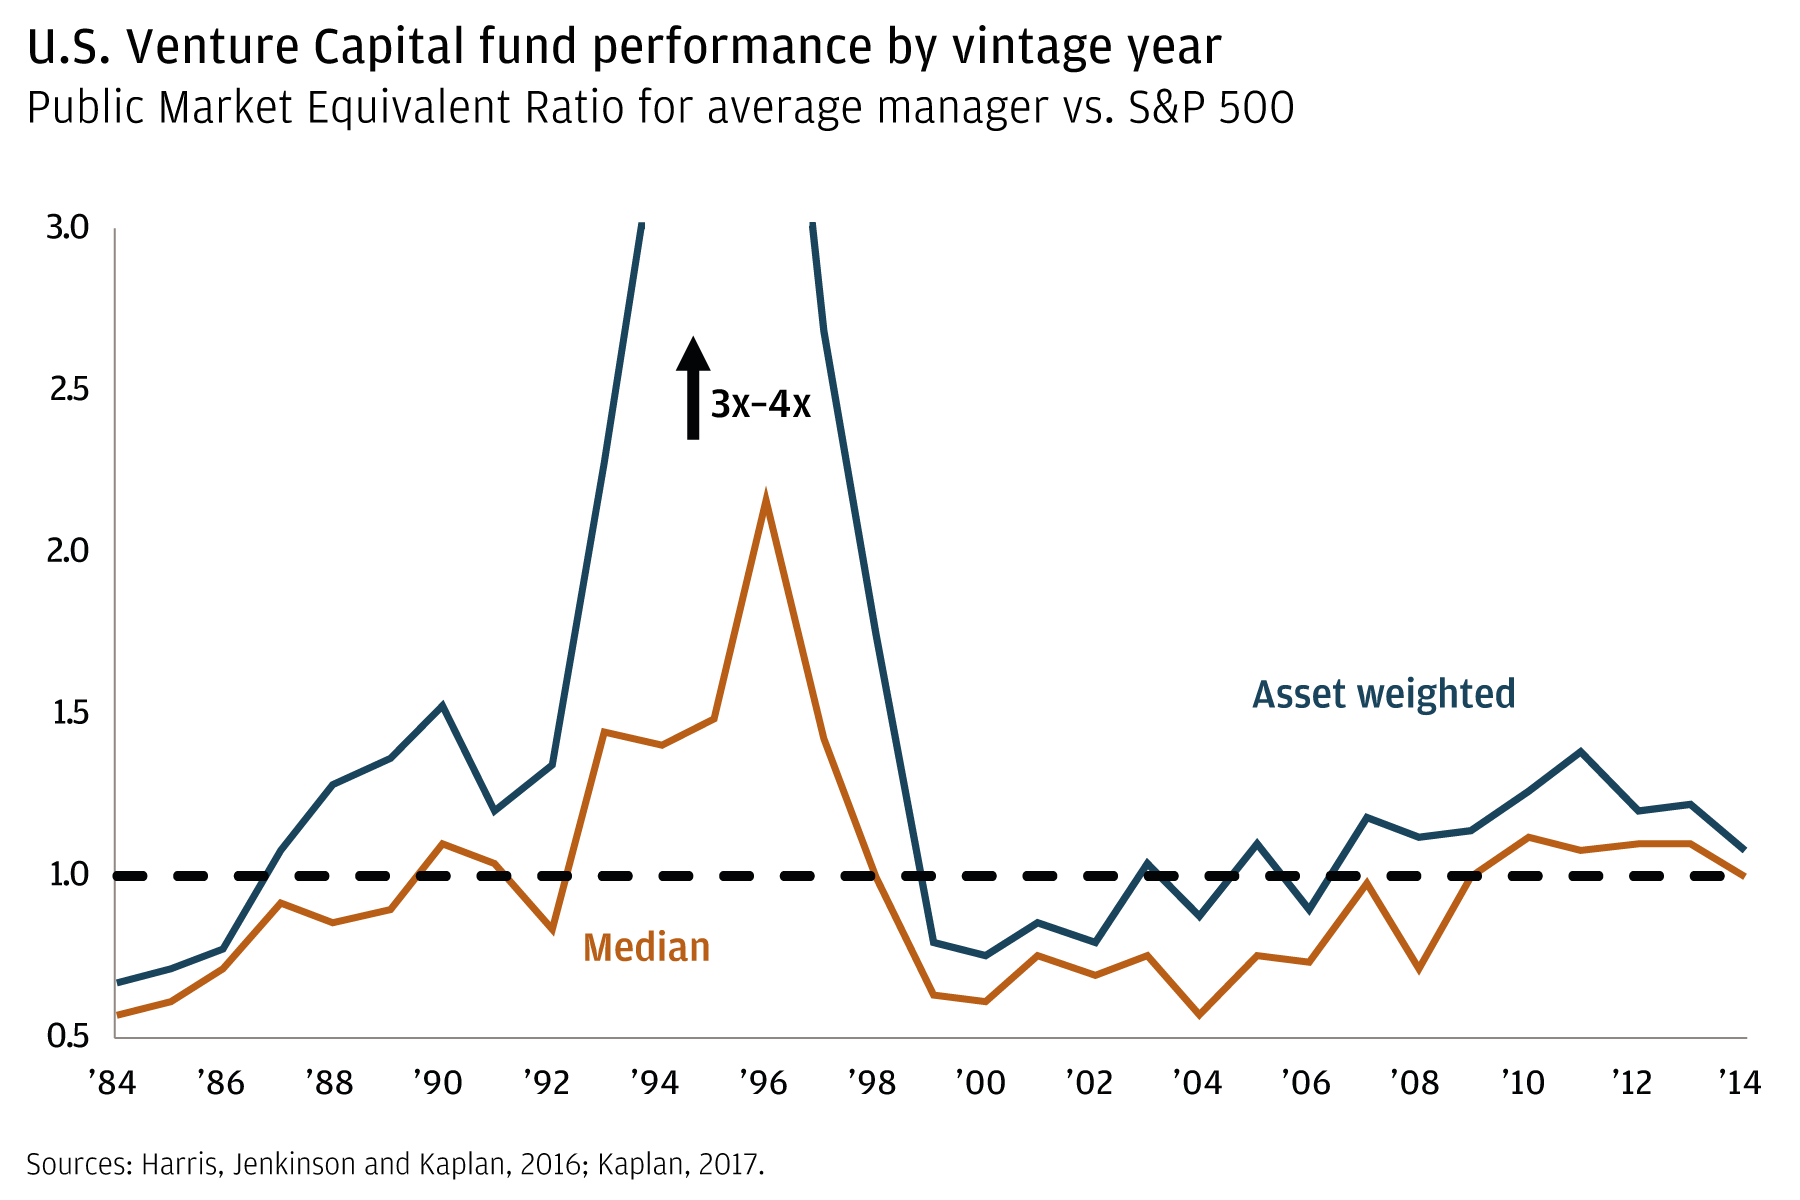 Line chart showing the ratio of an average venture capital manager’s median and asset-weighted returns vs the S&P 500